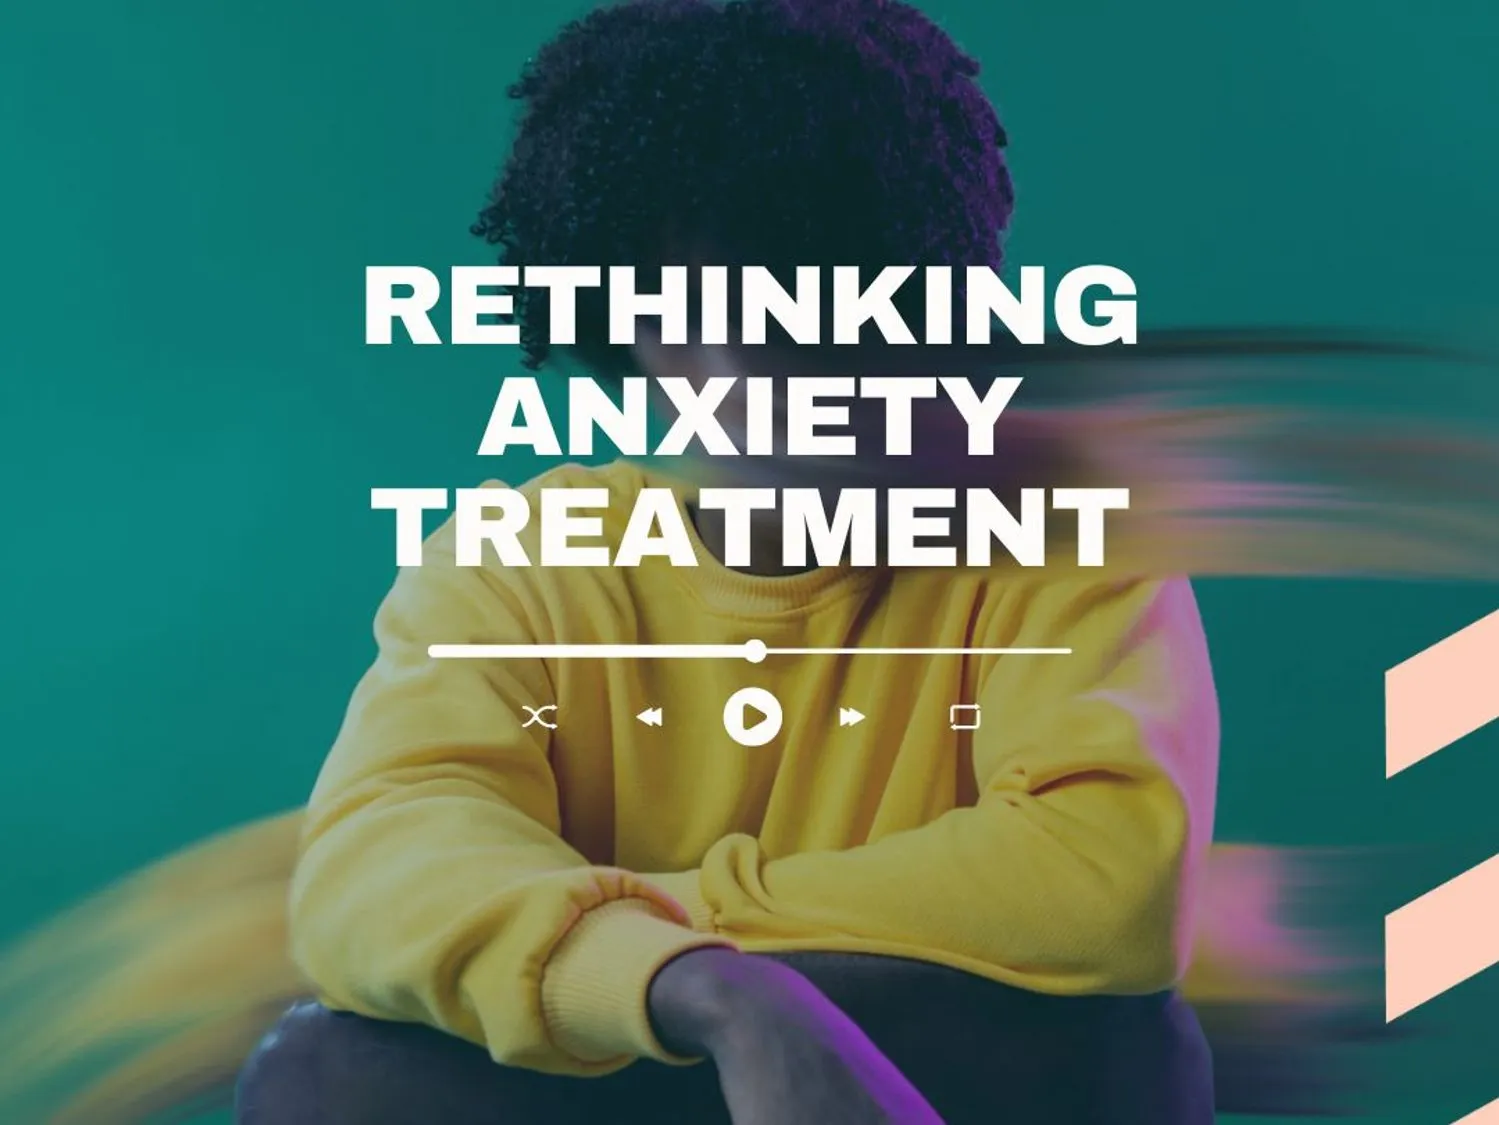 Anxiety disorders impact millions worldwide, and there is a growing concern that many are too focused on prescription medications and neglecting other management approaches.   While medications like SSRIs and Pregabalin can alleviate symptoms, they carry risks like addiction and side effects. Anxiety treatment approaches vary and could include lifestyle changes such as improved diet, sleep and exercise as well as therapies that compliment carefully monitor levels of medication if necessary.  If you or a loved one are struggling with anxiety or addiction, our specialist Treatment Advisors provide confidential support and assessments for recovery.